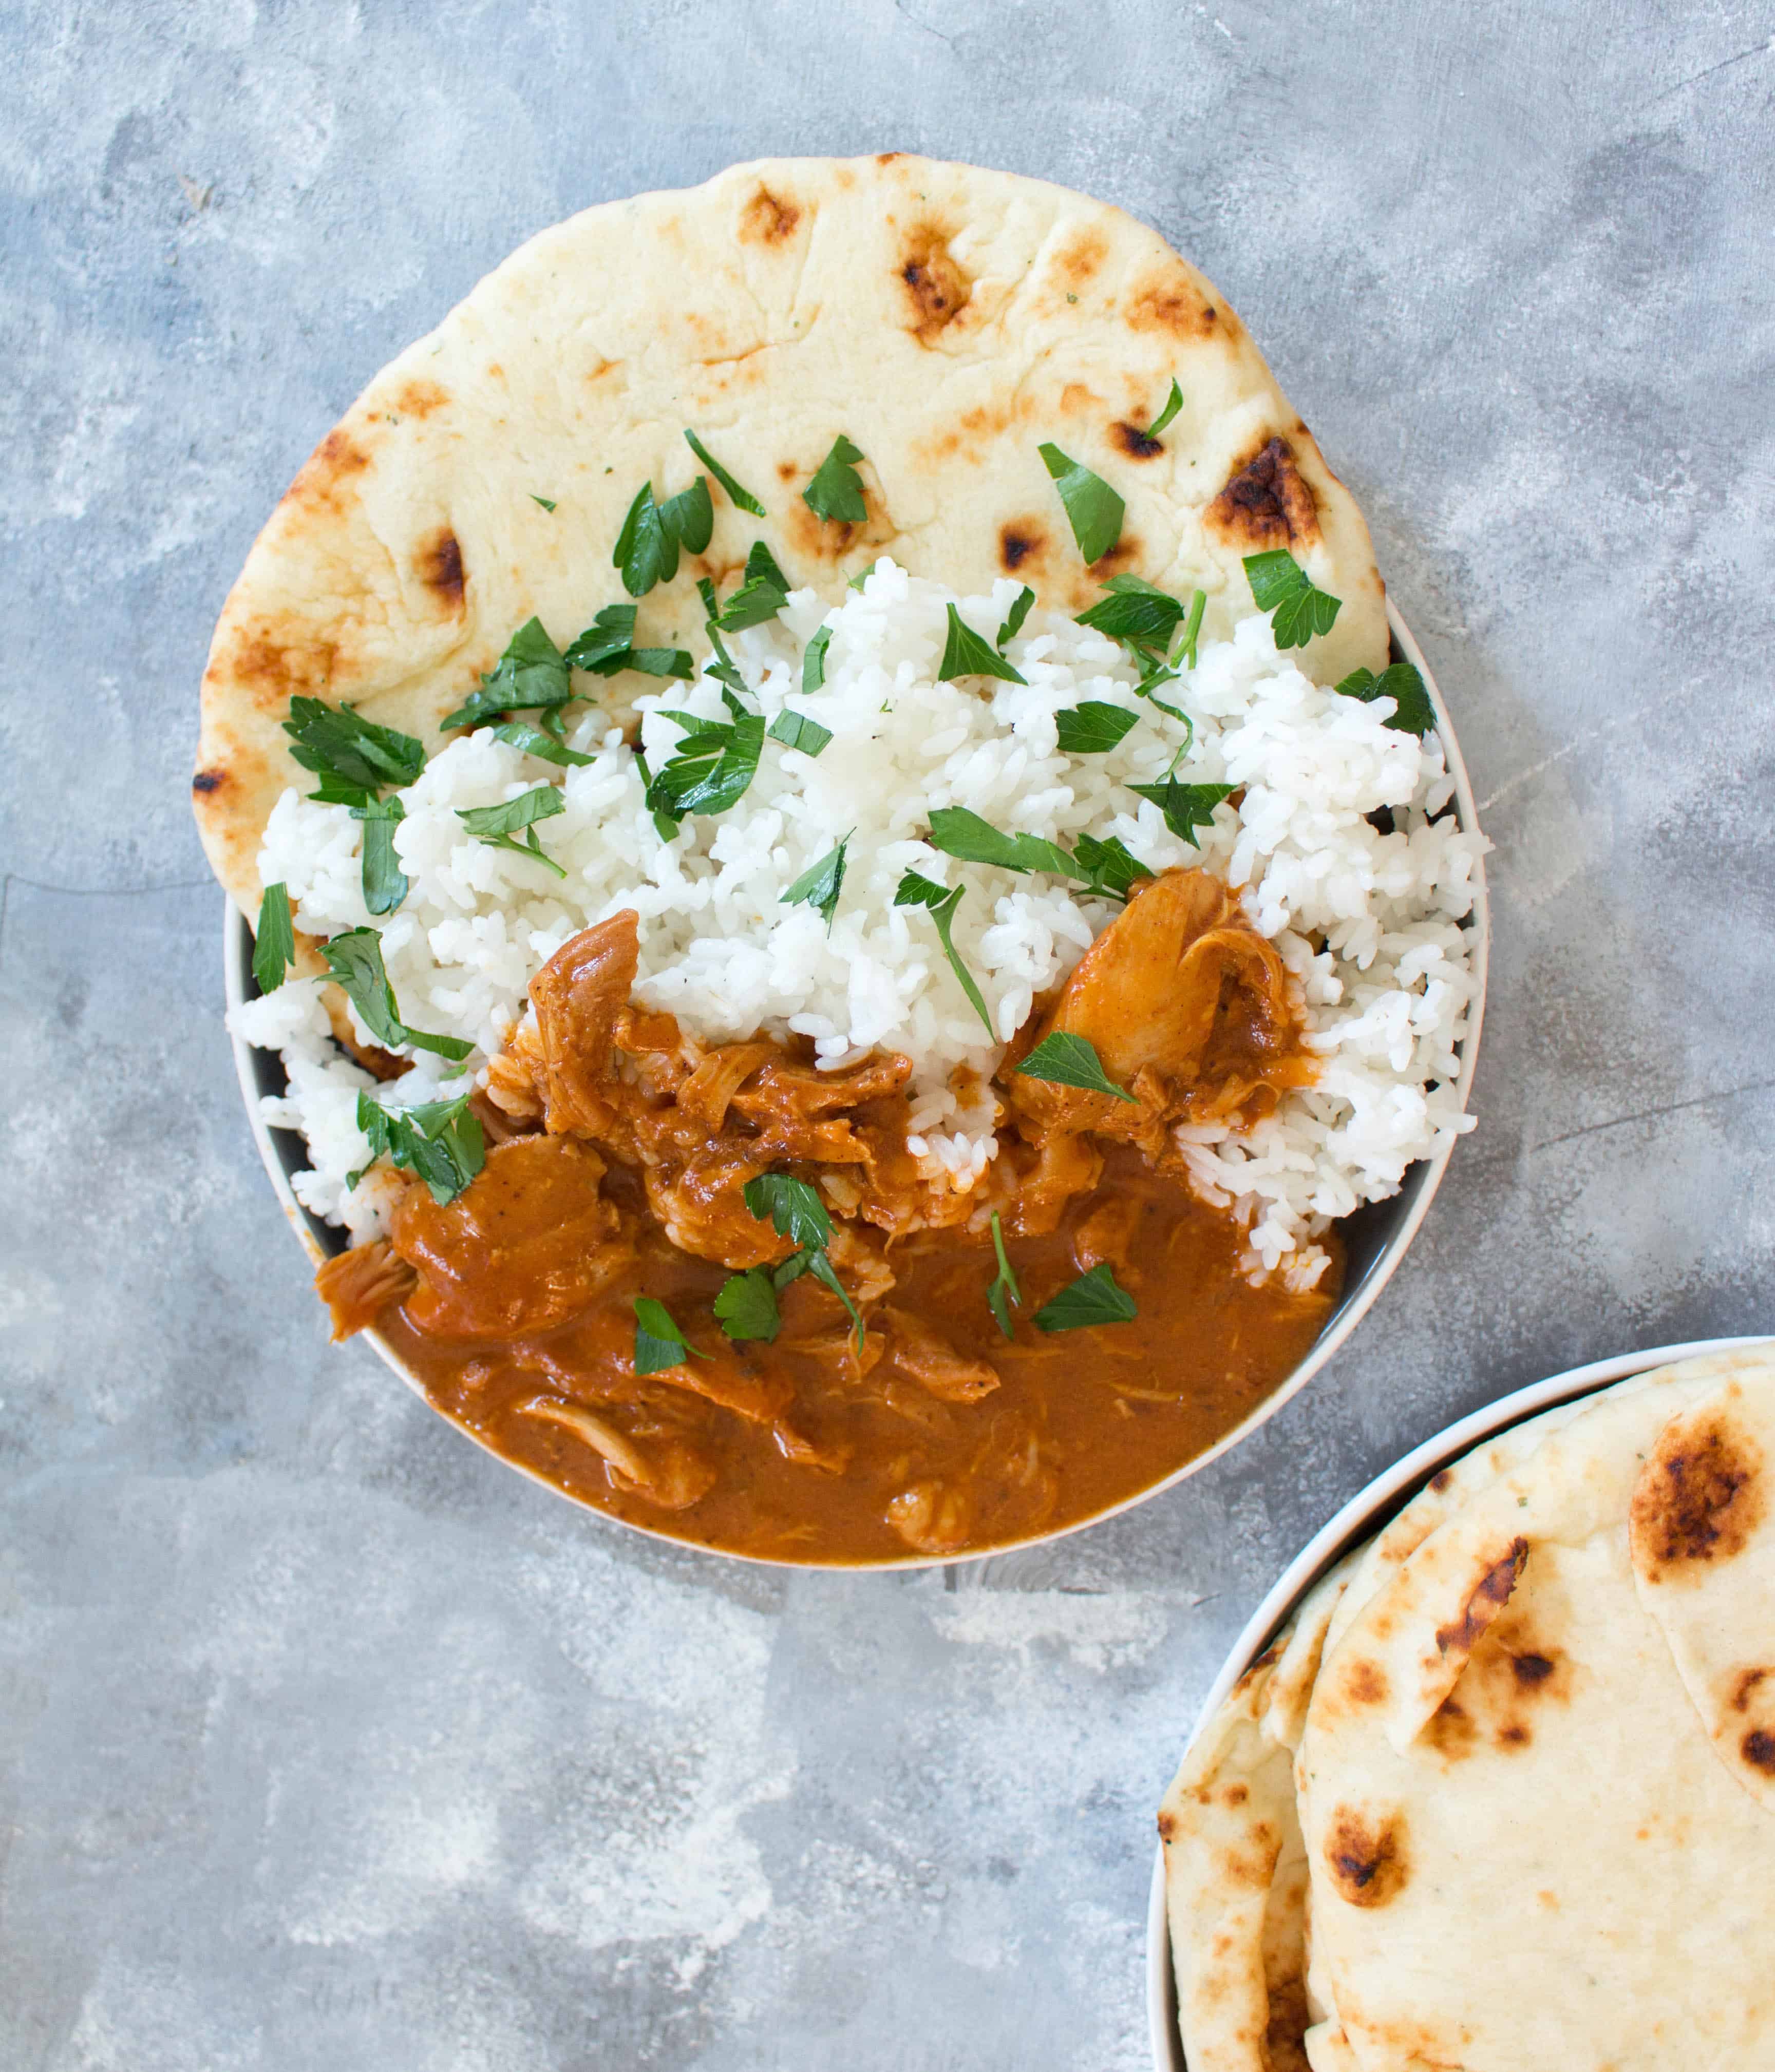 This Healthy Instant Pot Butter Chicken is a lightened up version that takes less than 30 minutes to make and is still rich and creamy. #InstantPotRecipes #InstantPot #ButterChicken #ChickenRecipes